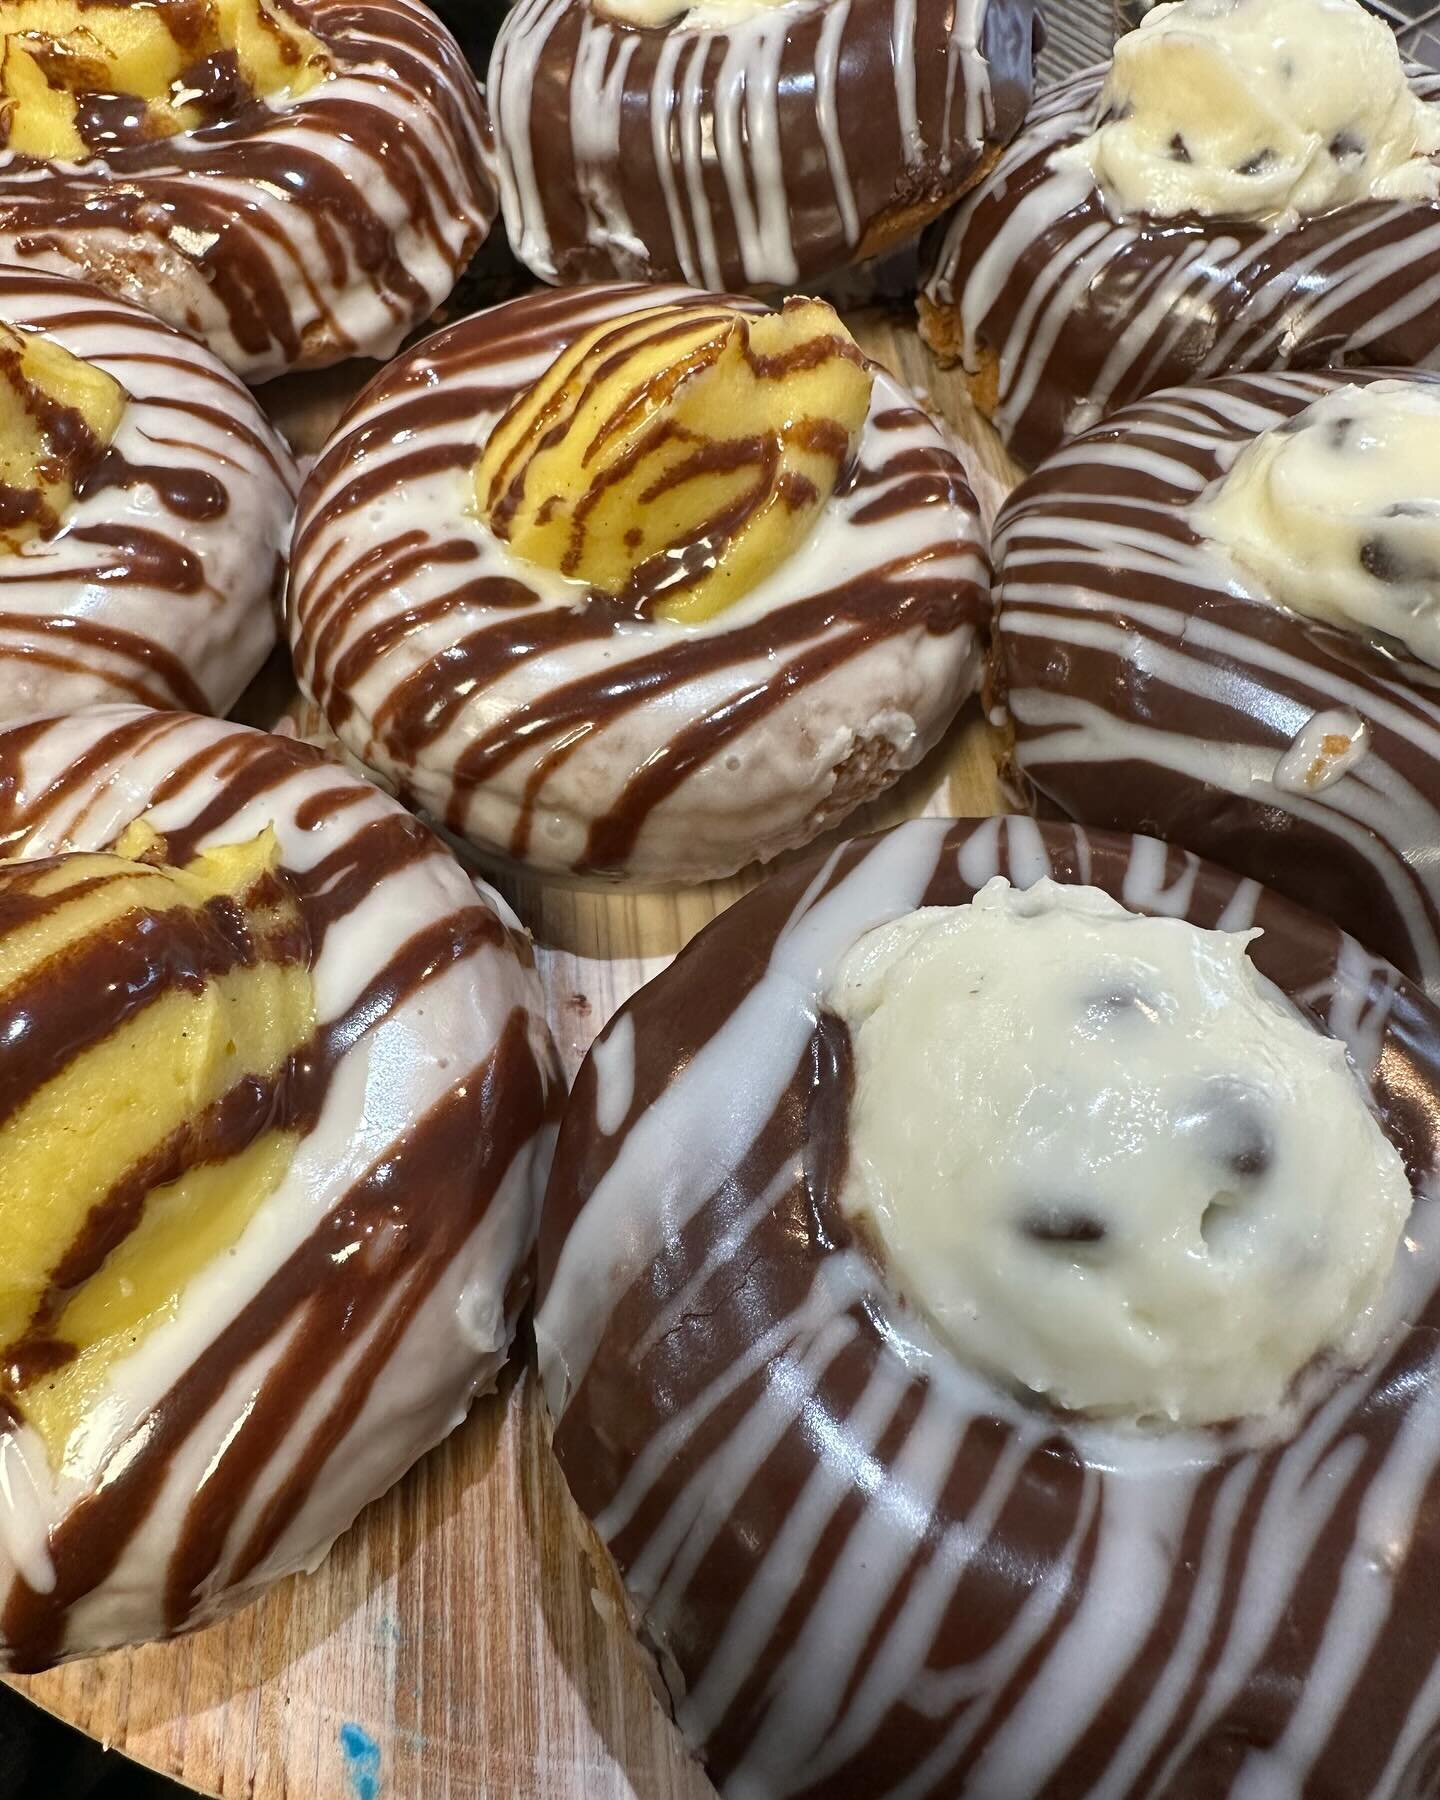 Stuffed Do&rsquo; h nuts !!!! - cannoli (sorry not df) and our creamy dr bakers custard 😋

#glutenfree #dairyfree #ourpequannock #smallbatchbaking 
#togetherwearelimitless #bakedfresh
#omglutenfree#youcanhaveyourcakeandeatittoo #freefromeverythingbu